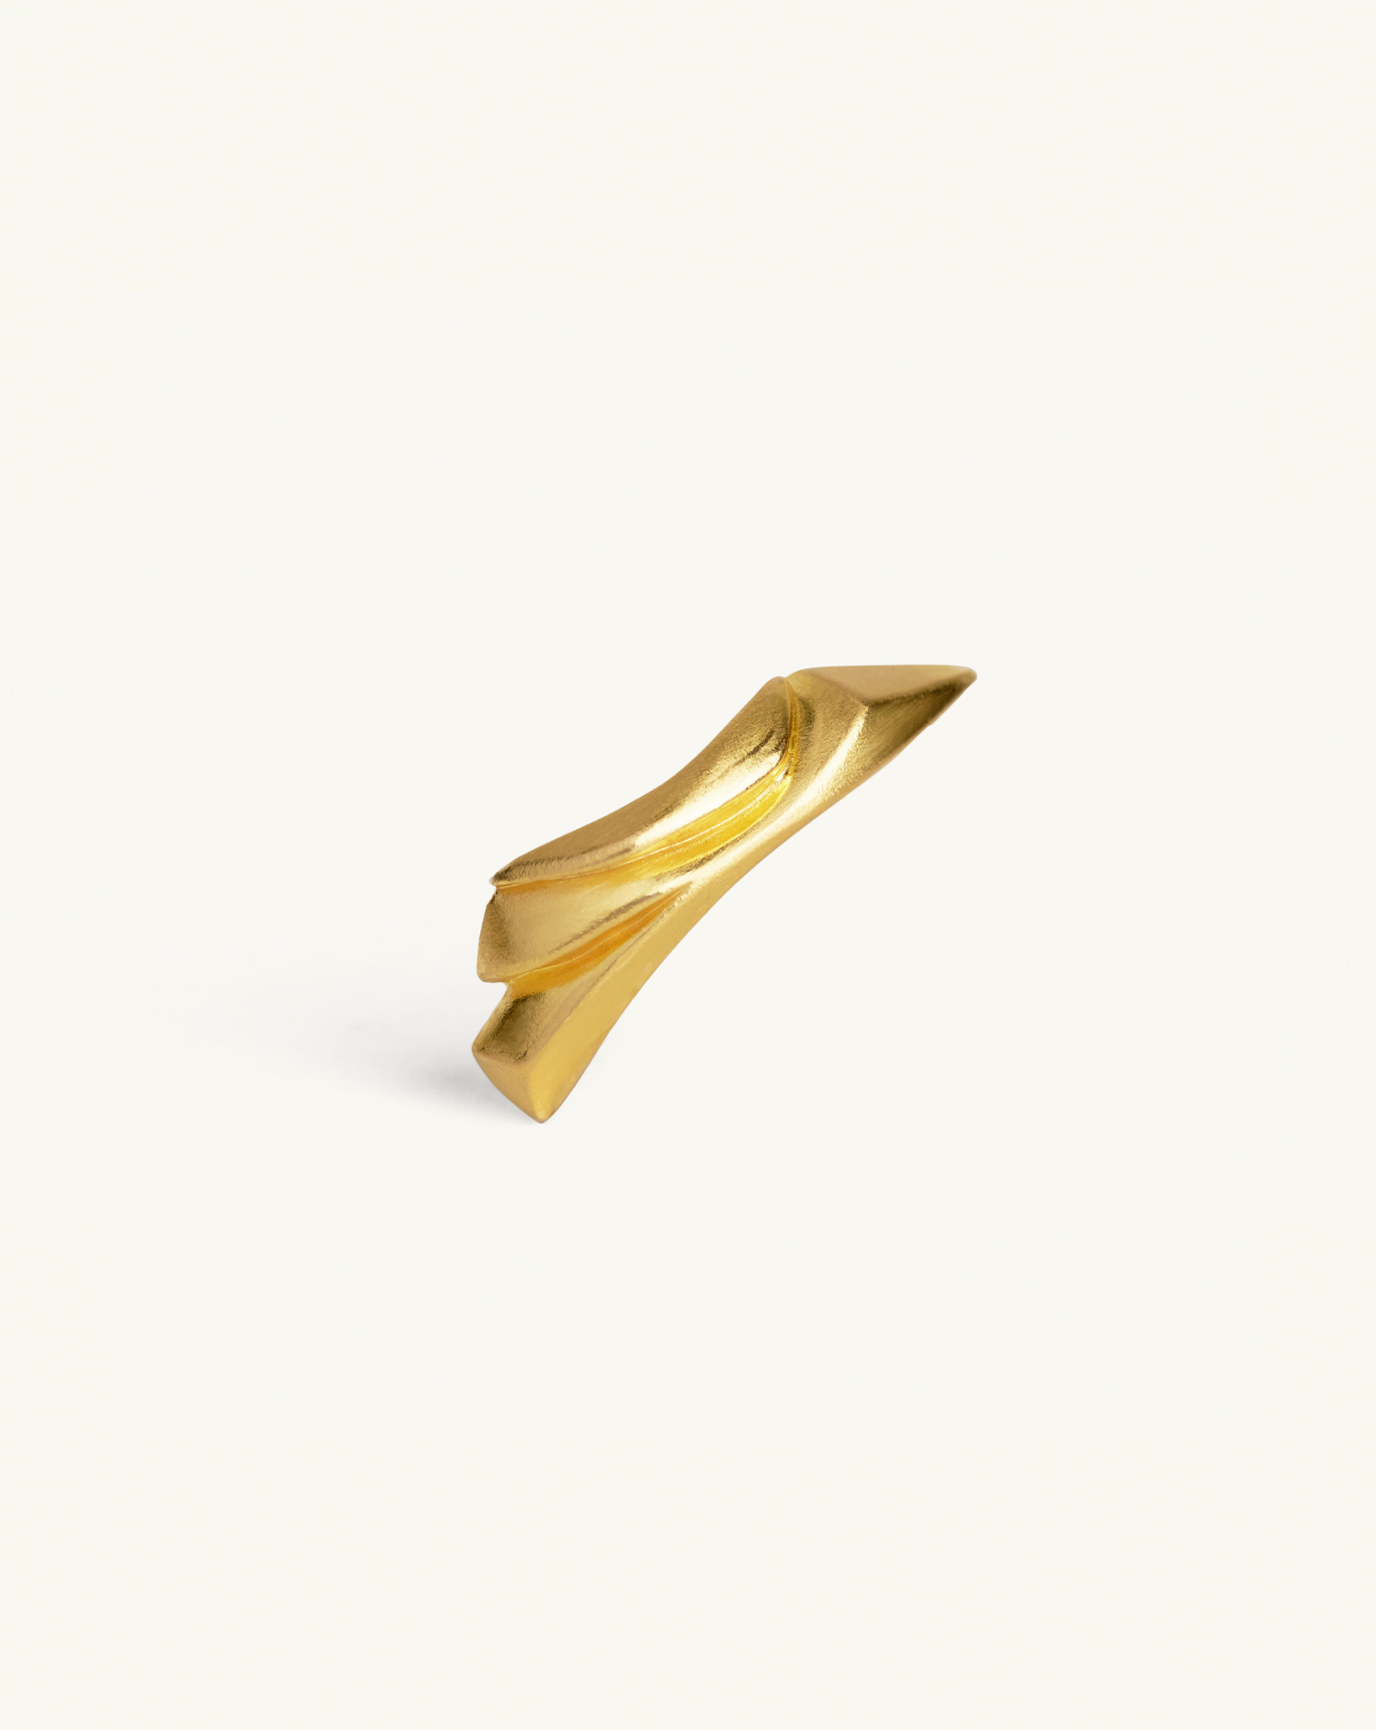 Product image of the sculptural pin in gold